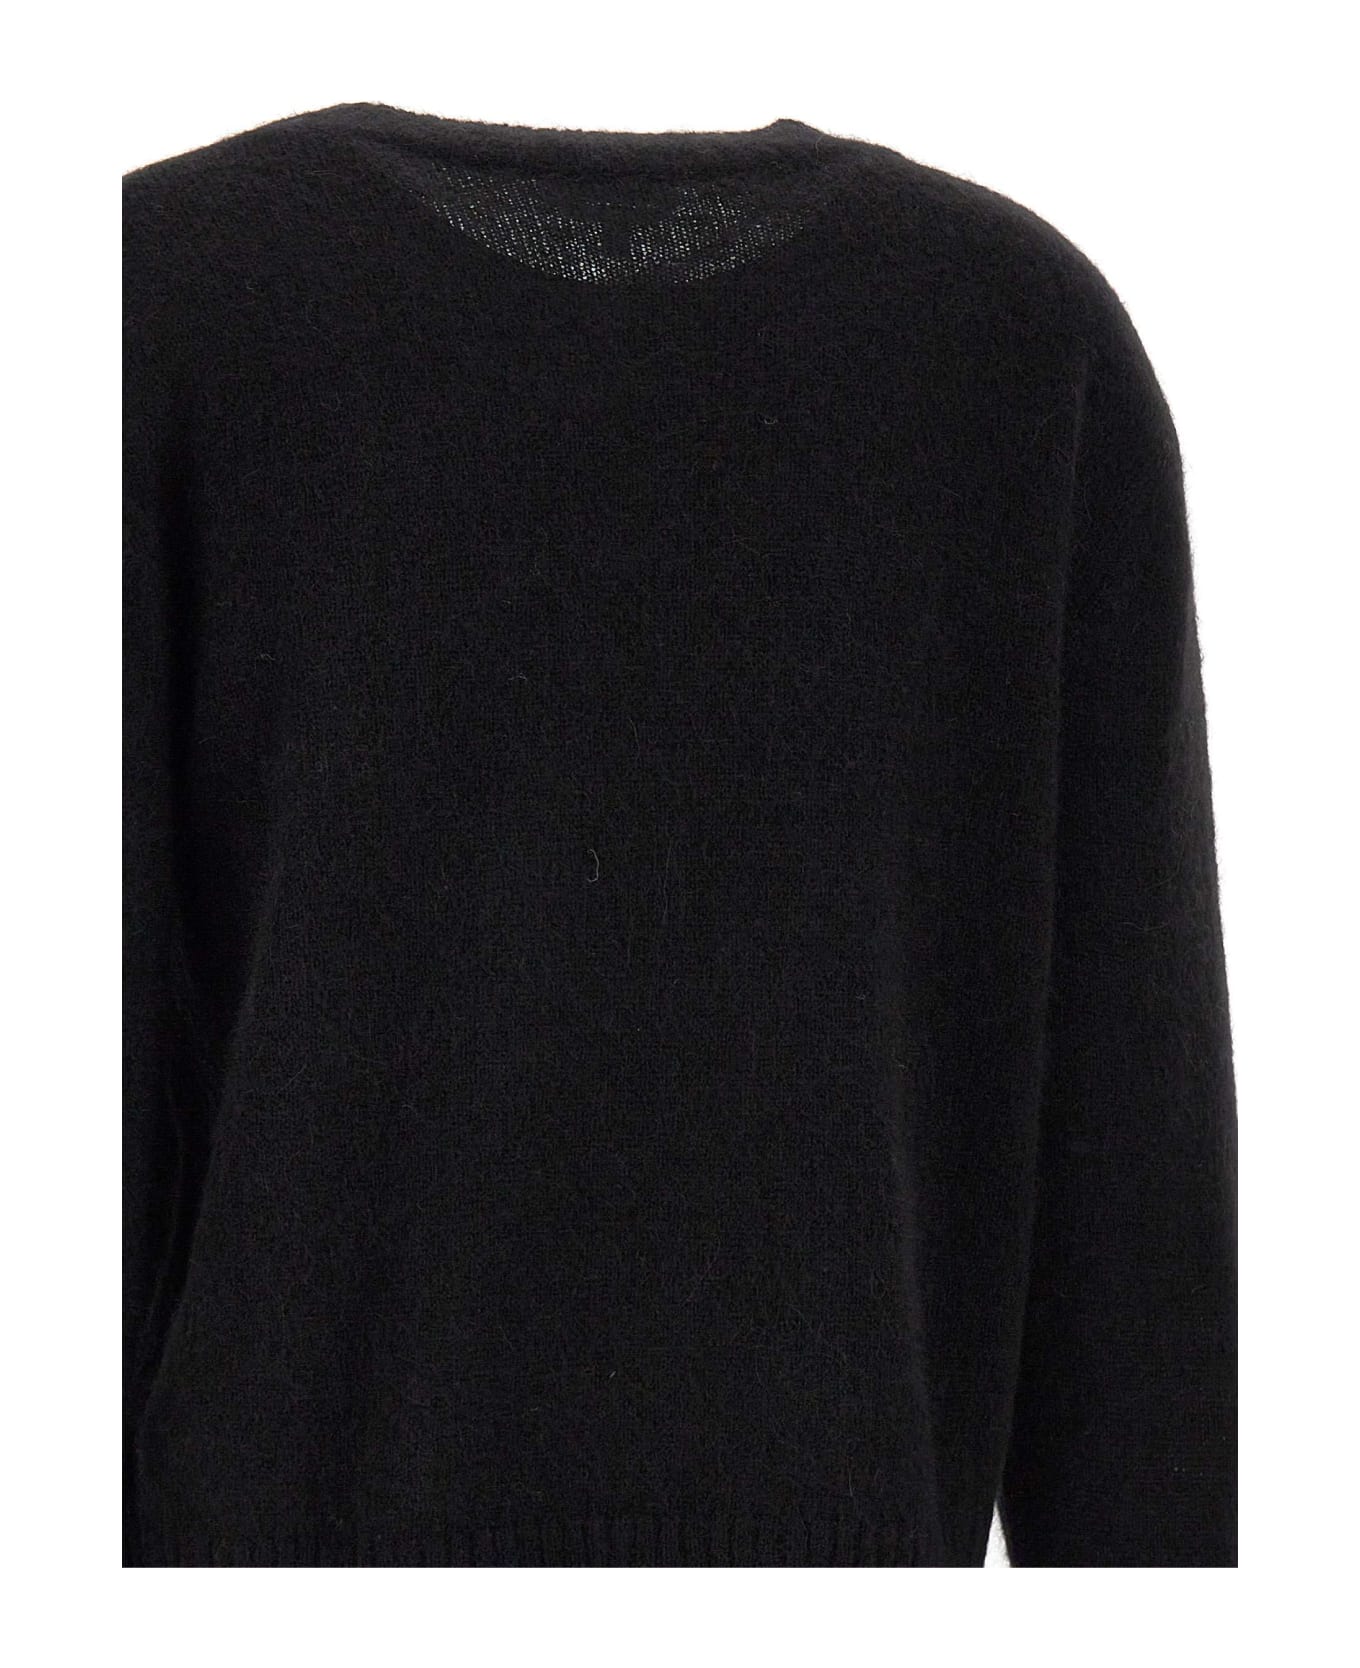 A.P.C. Alison And Merino Wool Pullover - BLACK